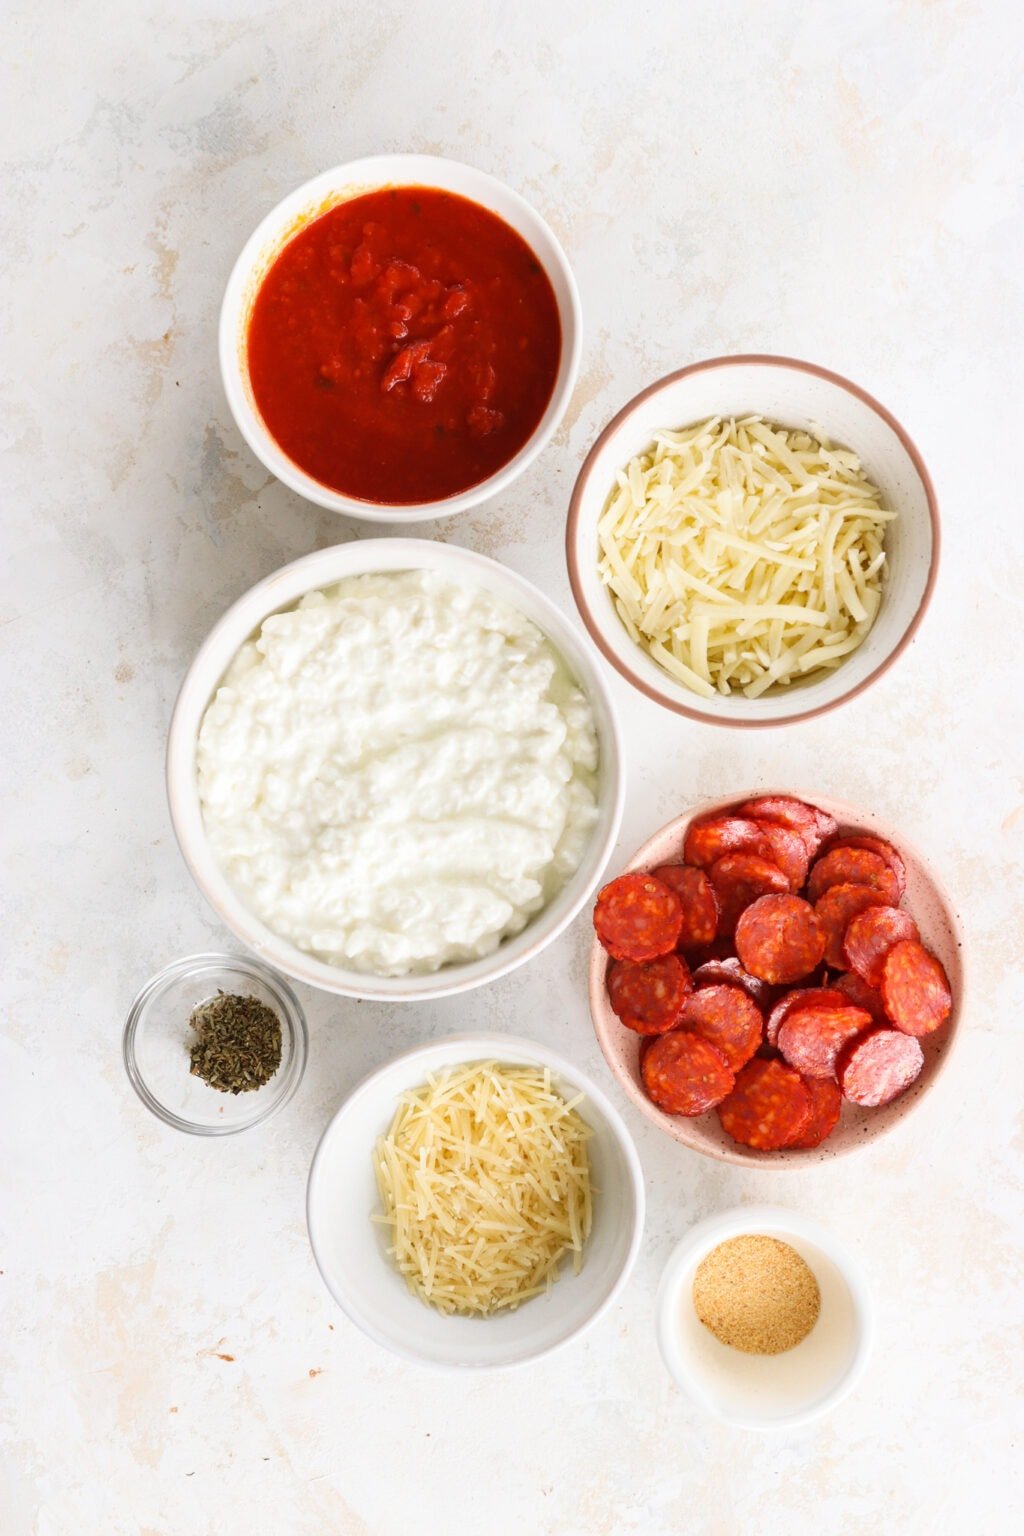 Ingredients for Quick Baked Cottage Cheese Pizza Bowl Dip in white bowls, including cottage cheese, parmesan cheese, garlic powder, Italian seasoning, marinara sauce, mozzarella cheese, turkey pepperoni or pepperoni